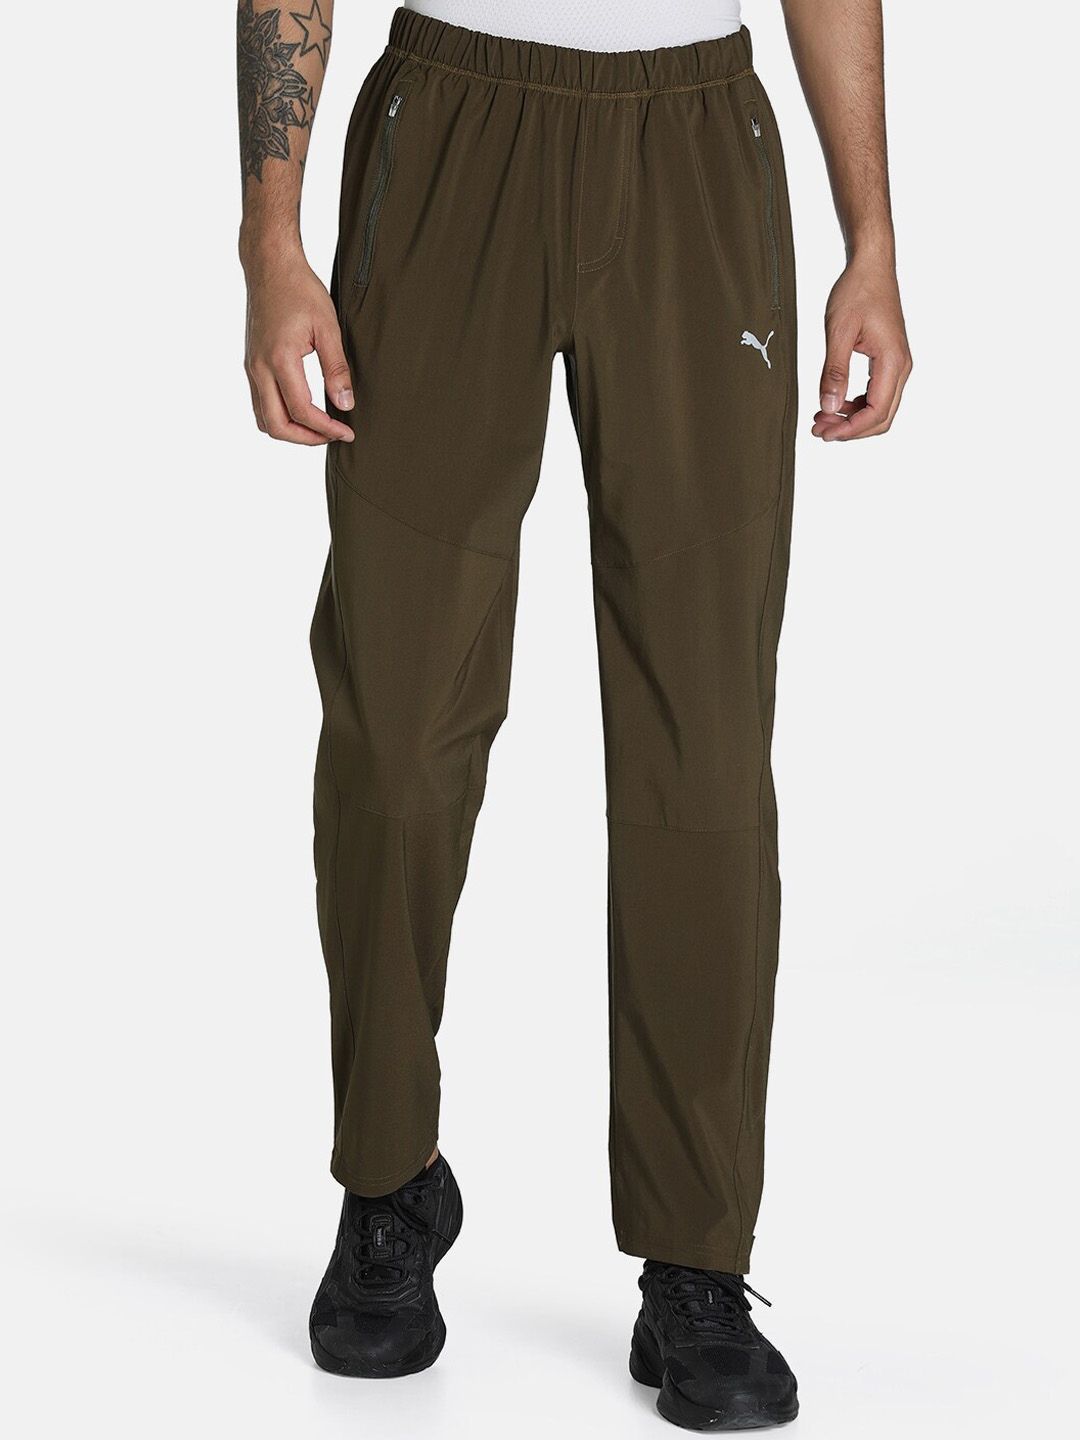 Myntra - Puma Men Olive Green Tapered Woven Regular Fit Track Pants